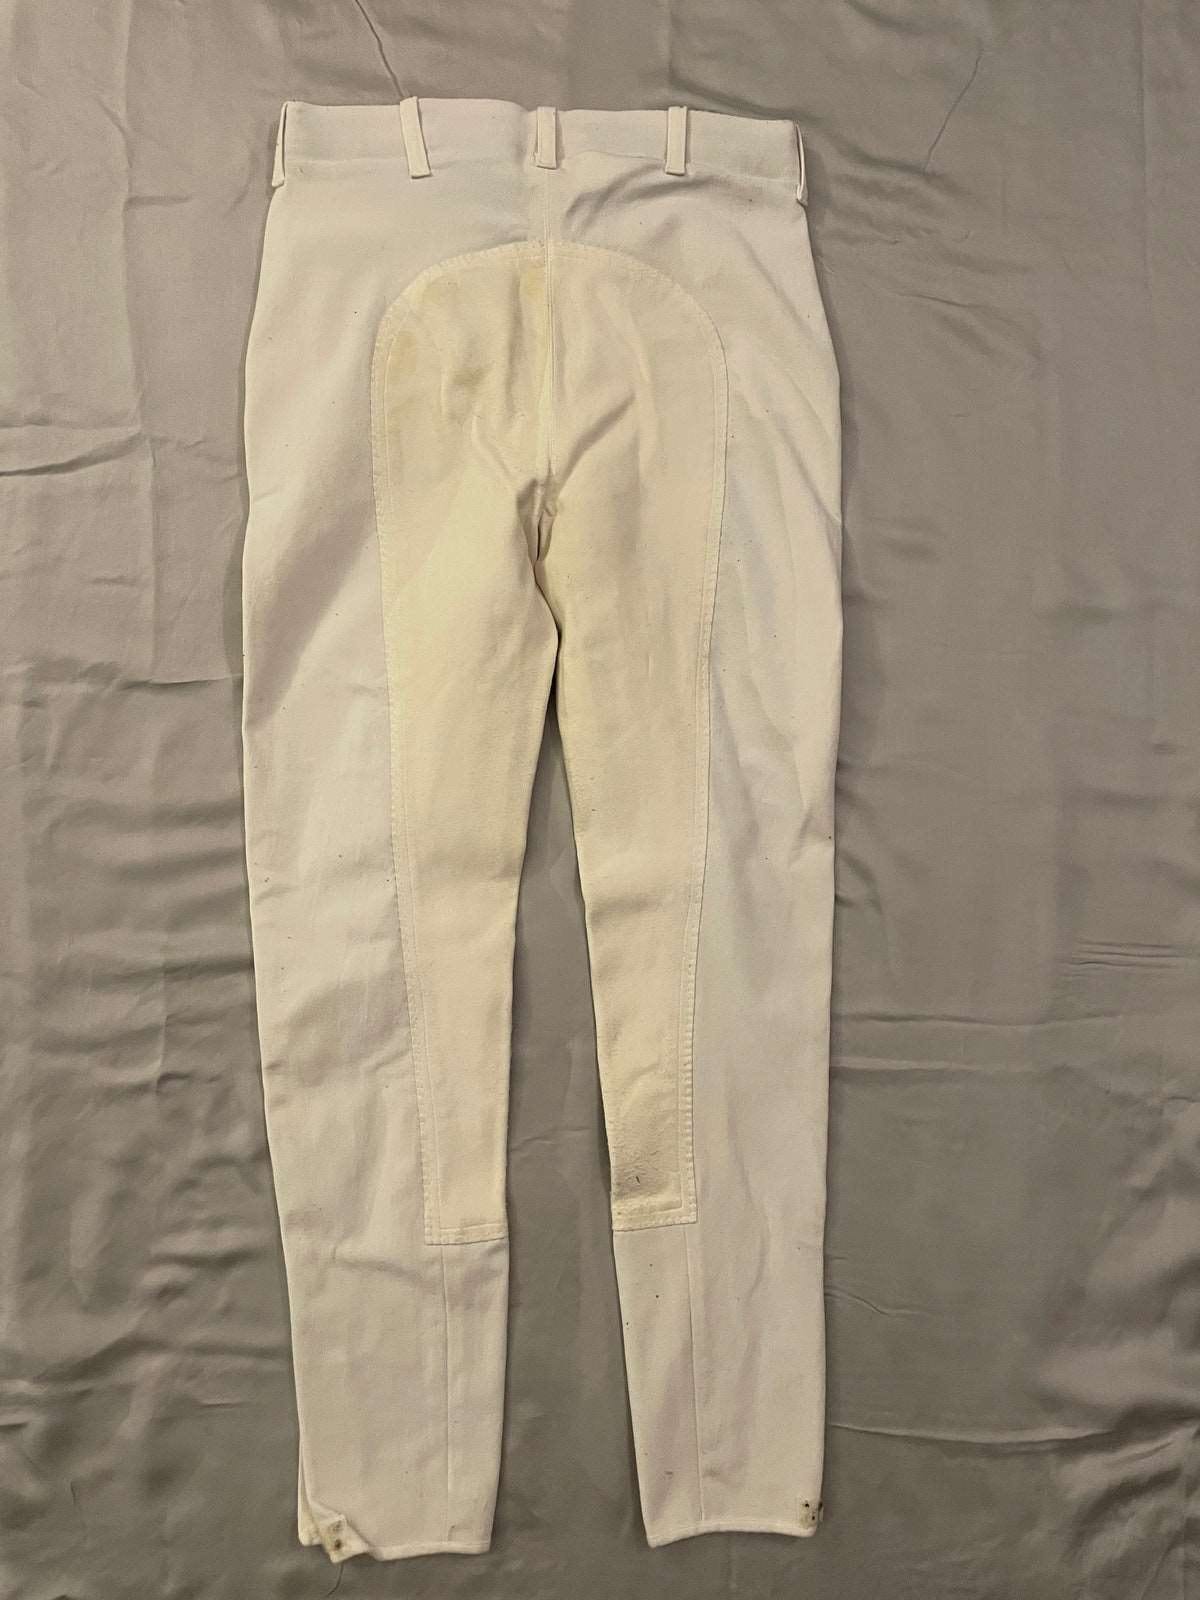 ThriftedEquestrian Clothing 28L On Course Full Seat Breeches - 28L